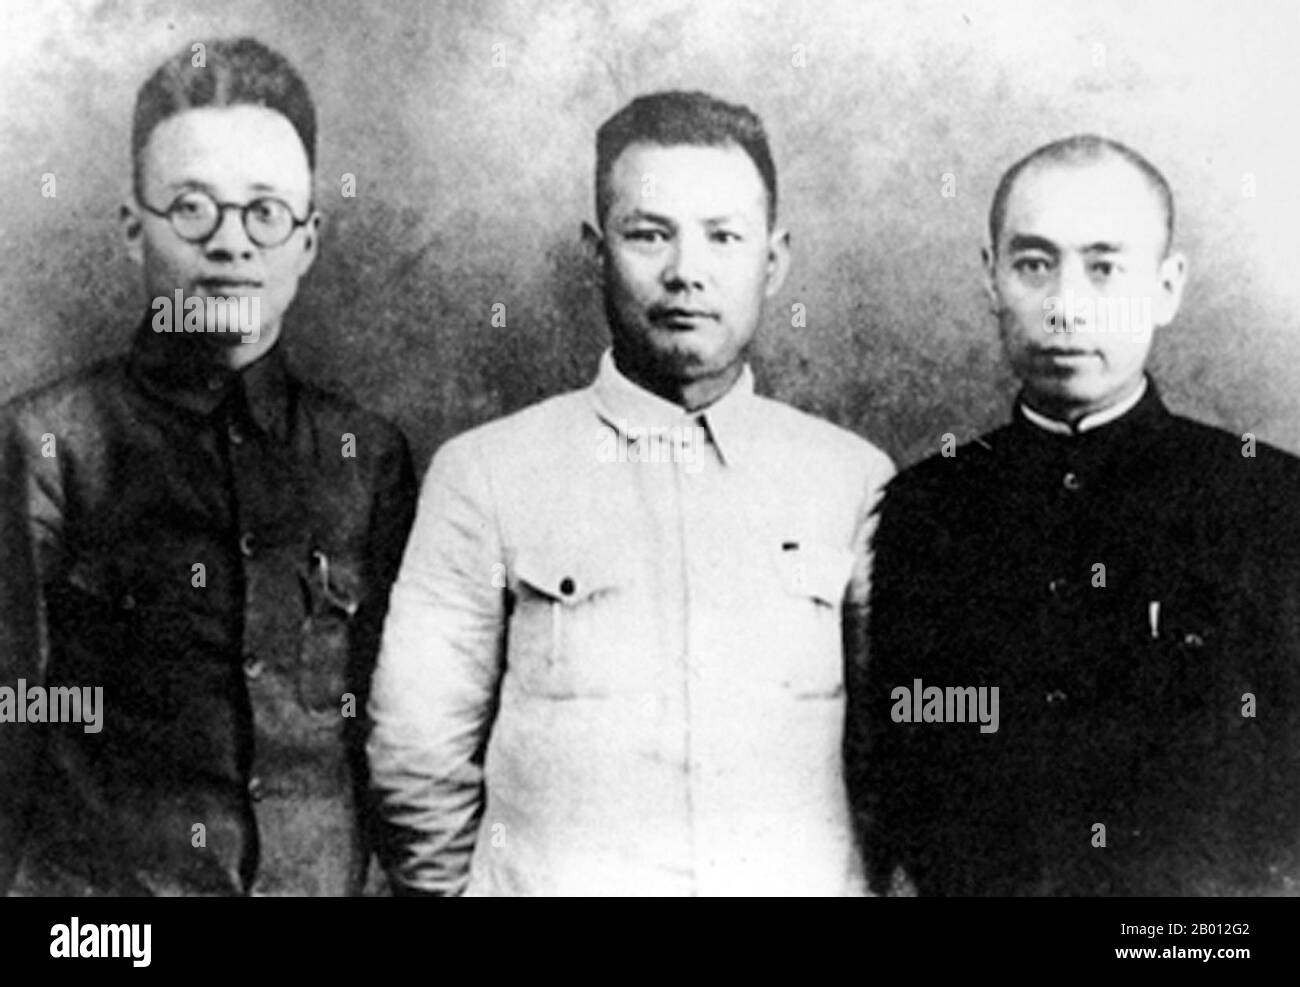 China: Qin Bangxian, Ye Jianying and Zhou Enlai in Xi'an after the Xi'an Incident, 1936.  The Xi'an Incident of December 1936 (Xī'an Shibiìan) took place in the city of Xi'an during the Chinese Civil War between the ruling Kuomintang (KMT) and the rebel Chinese Communist Party and just before the Second Sino-Japanese War. On 12 December 1936, Generalissimo Chiang Kai-shek, the leader of the KMT was suddenly arrested and kidnapped by Marshal Zhang Xueliang, a former warlord of Manchuria, then Japan-occupied Manchukuo. The incident led the Nationalists and the Communists to unite against Japan. Stock Photo